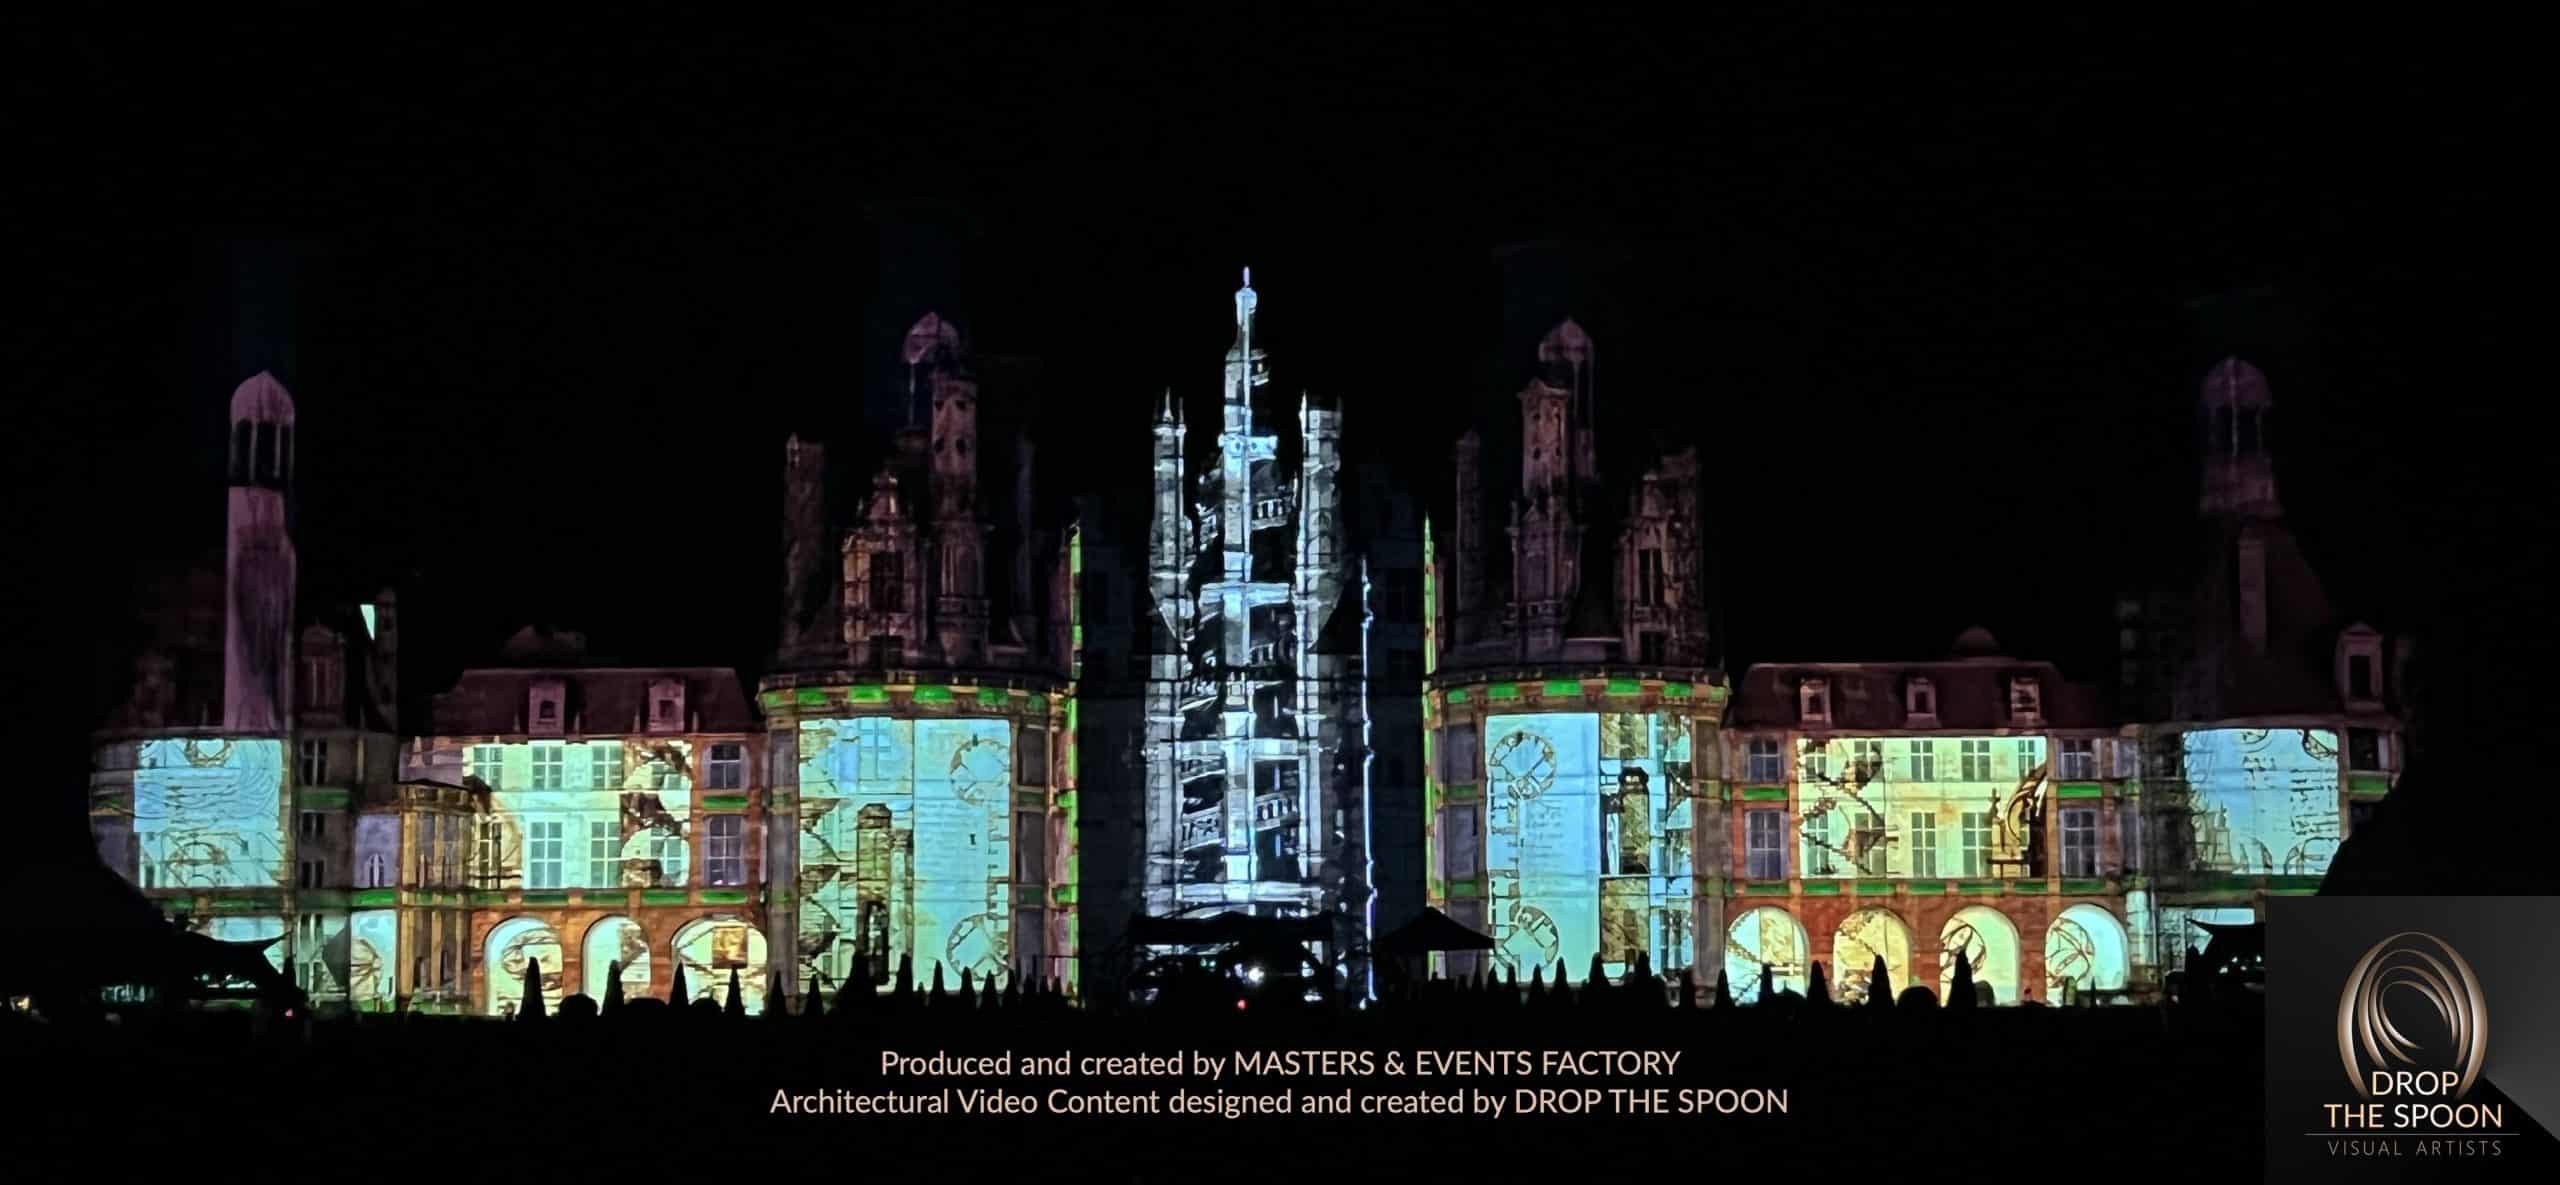 Les Nuits de Chambord - DTS Mapping